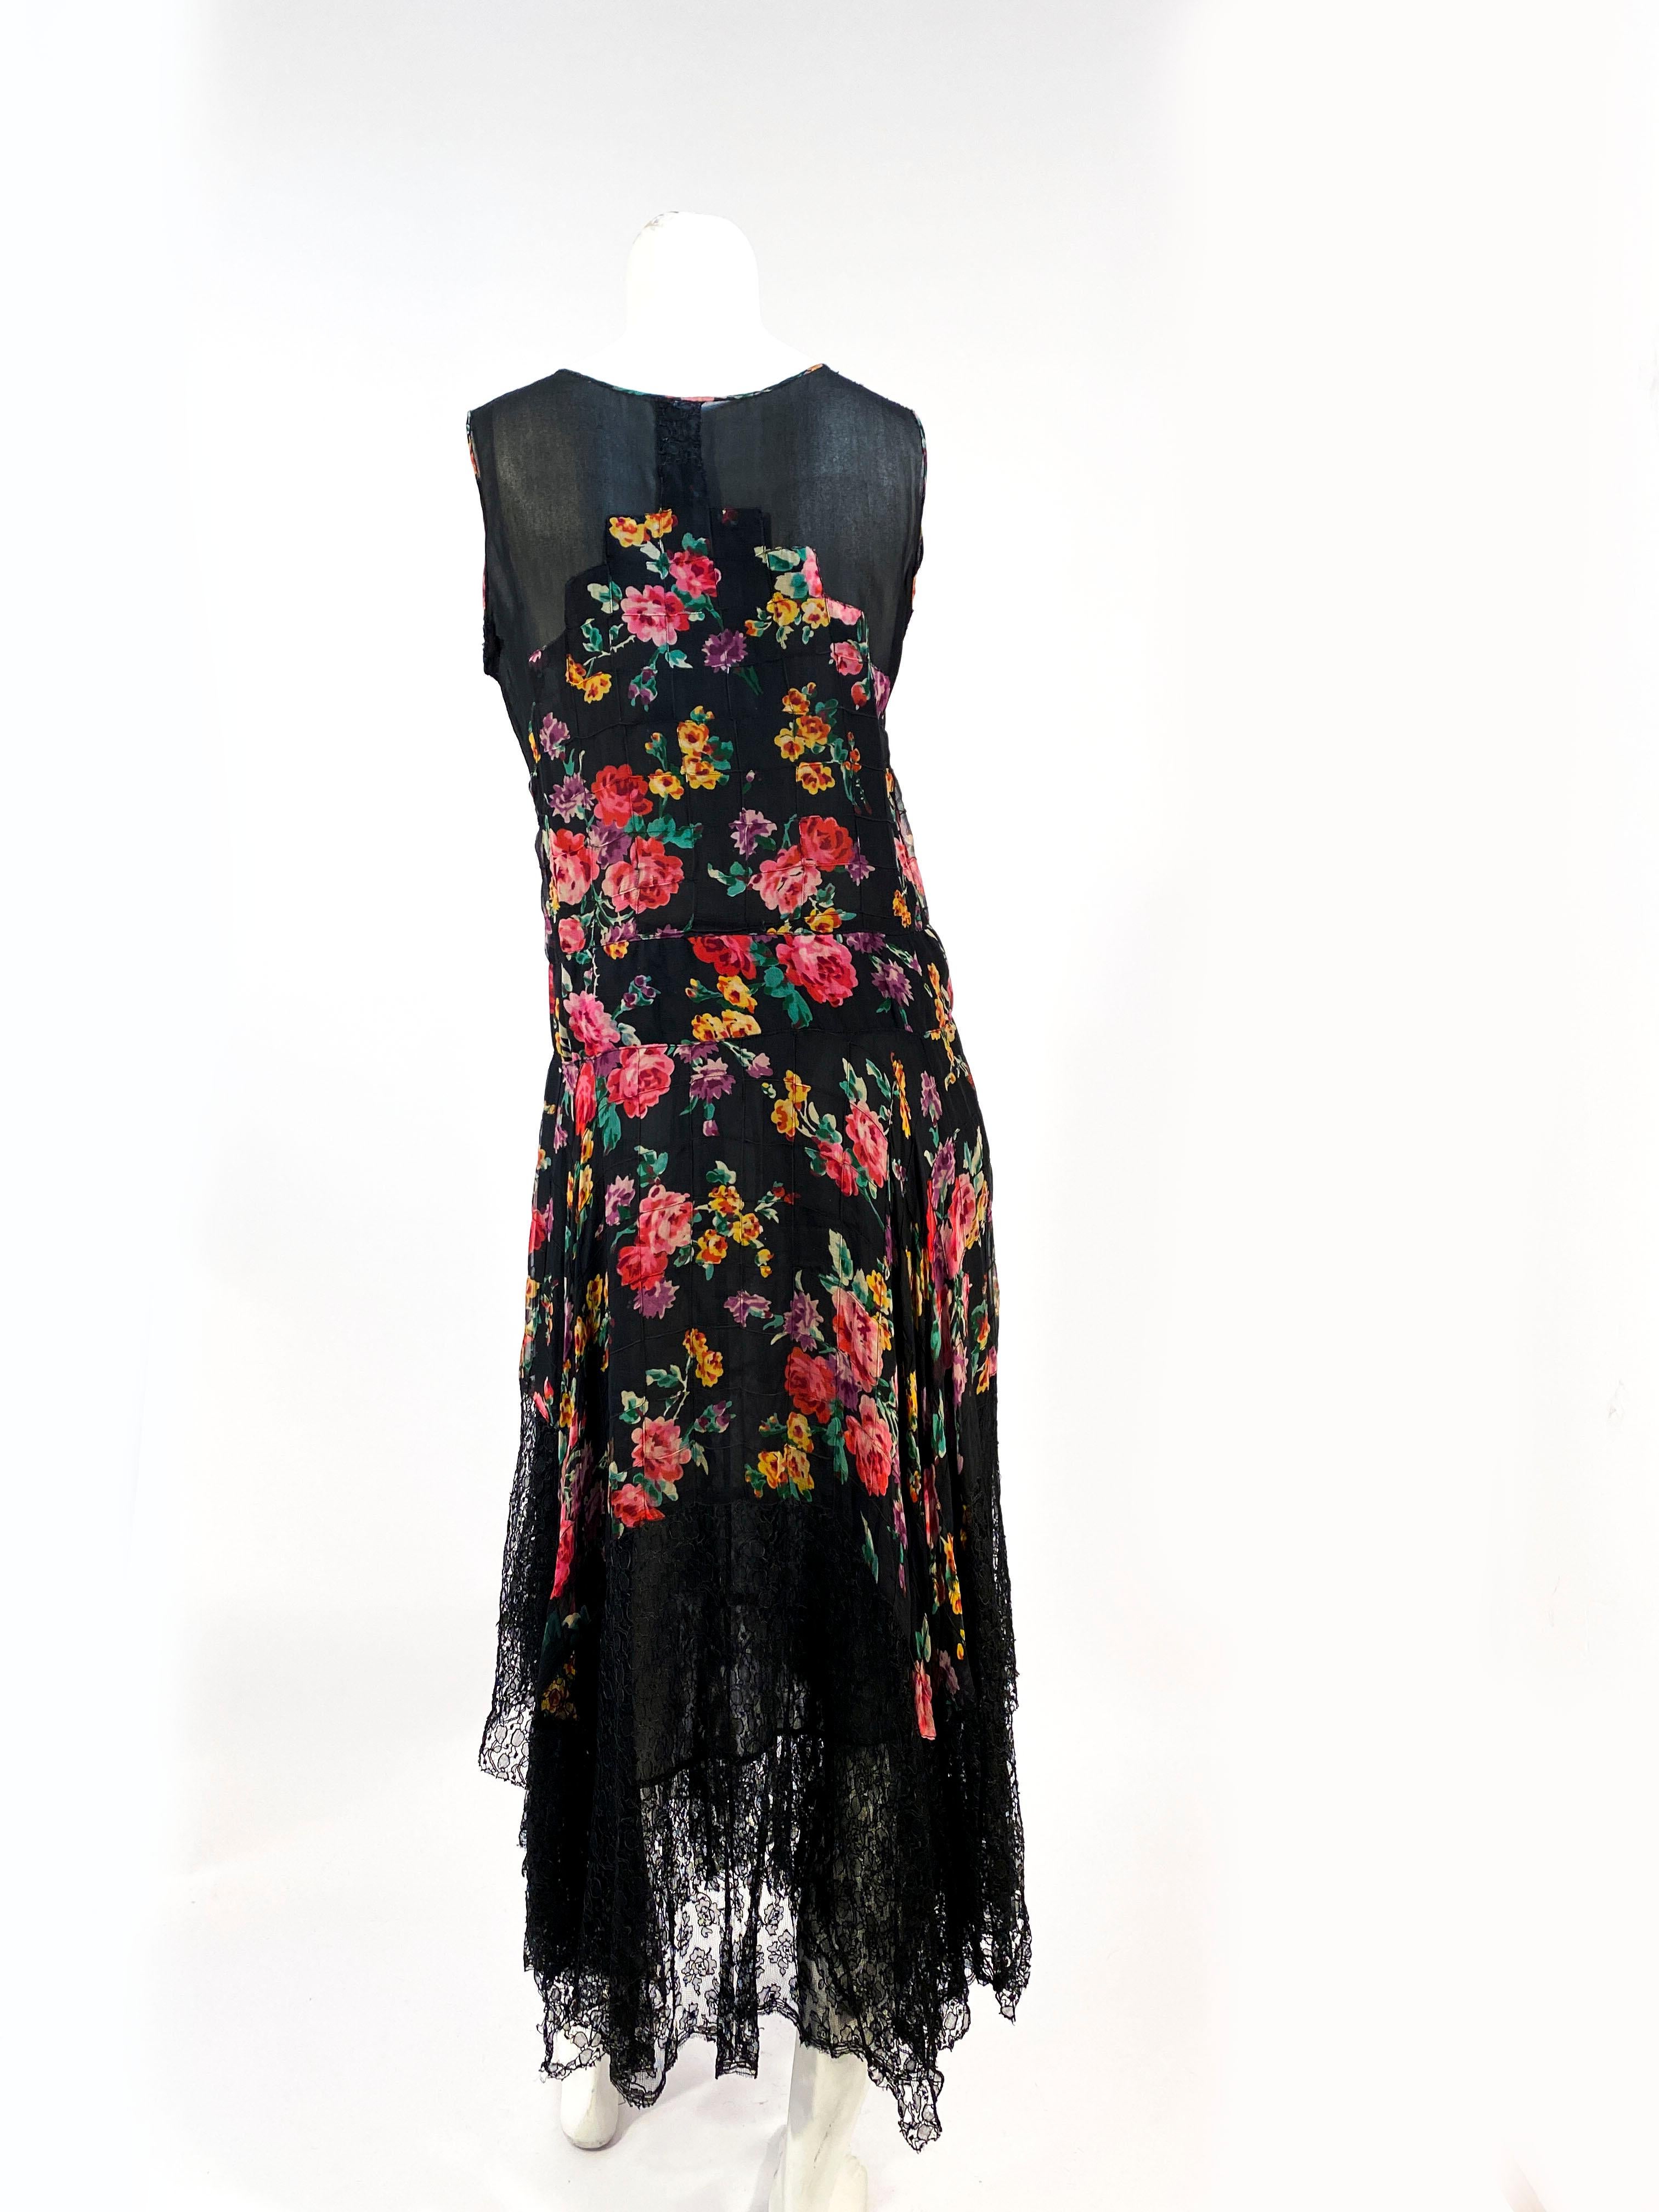 1920s Floral Printed Chiffon Drop-waist Dress with Lace Accents In Good Condition For Sale In San Francisco, CA